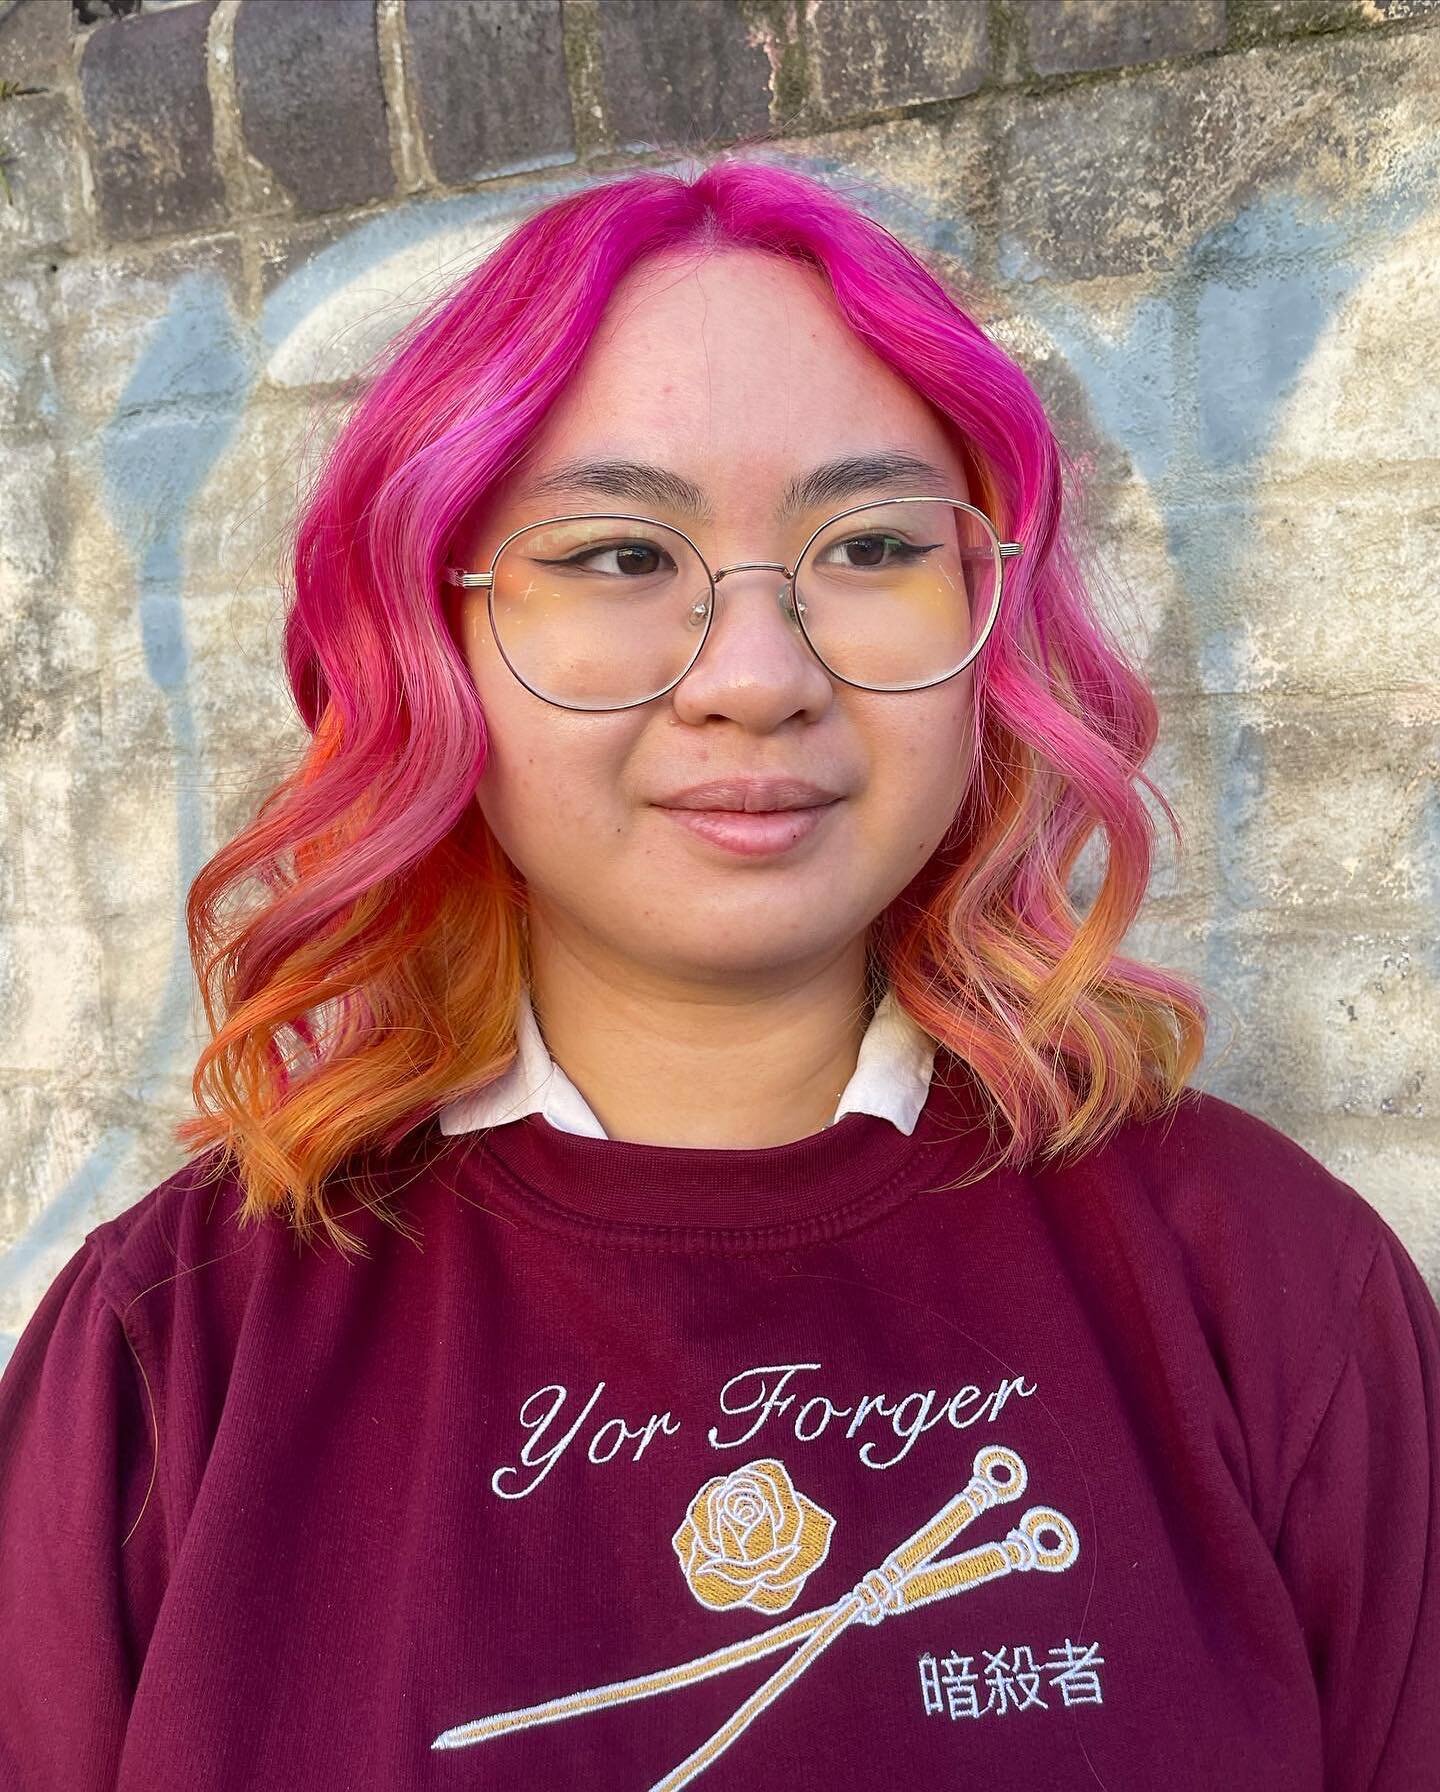 Don&rsquo;t think it can get any cuter then this ultimate colour combo💖💛💝💛 @taryn.ddcohair is an artist 😍

#ddcohair #colouredhair #maneaddicts #arcticfoxhaircolor #pinkhair #yellowhair #annadalehairsalon #sydneysalon #warehousesalon #innerwest 